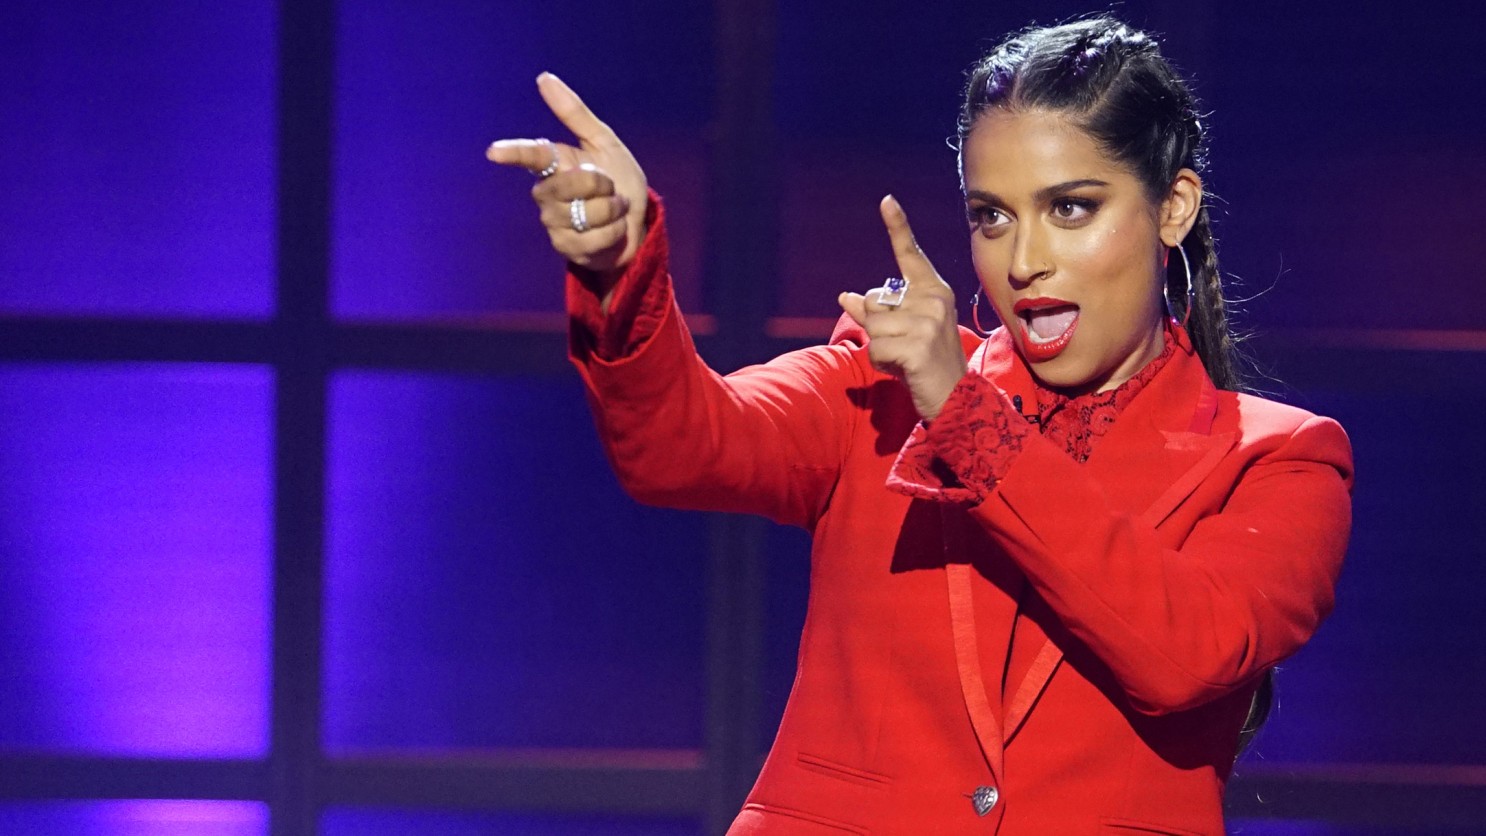 overrated comedians - Lilly Singh